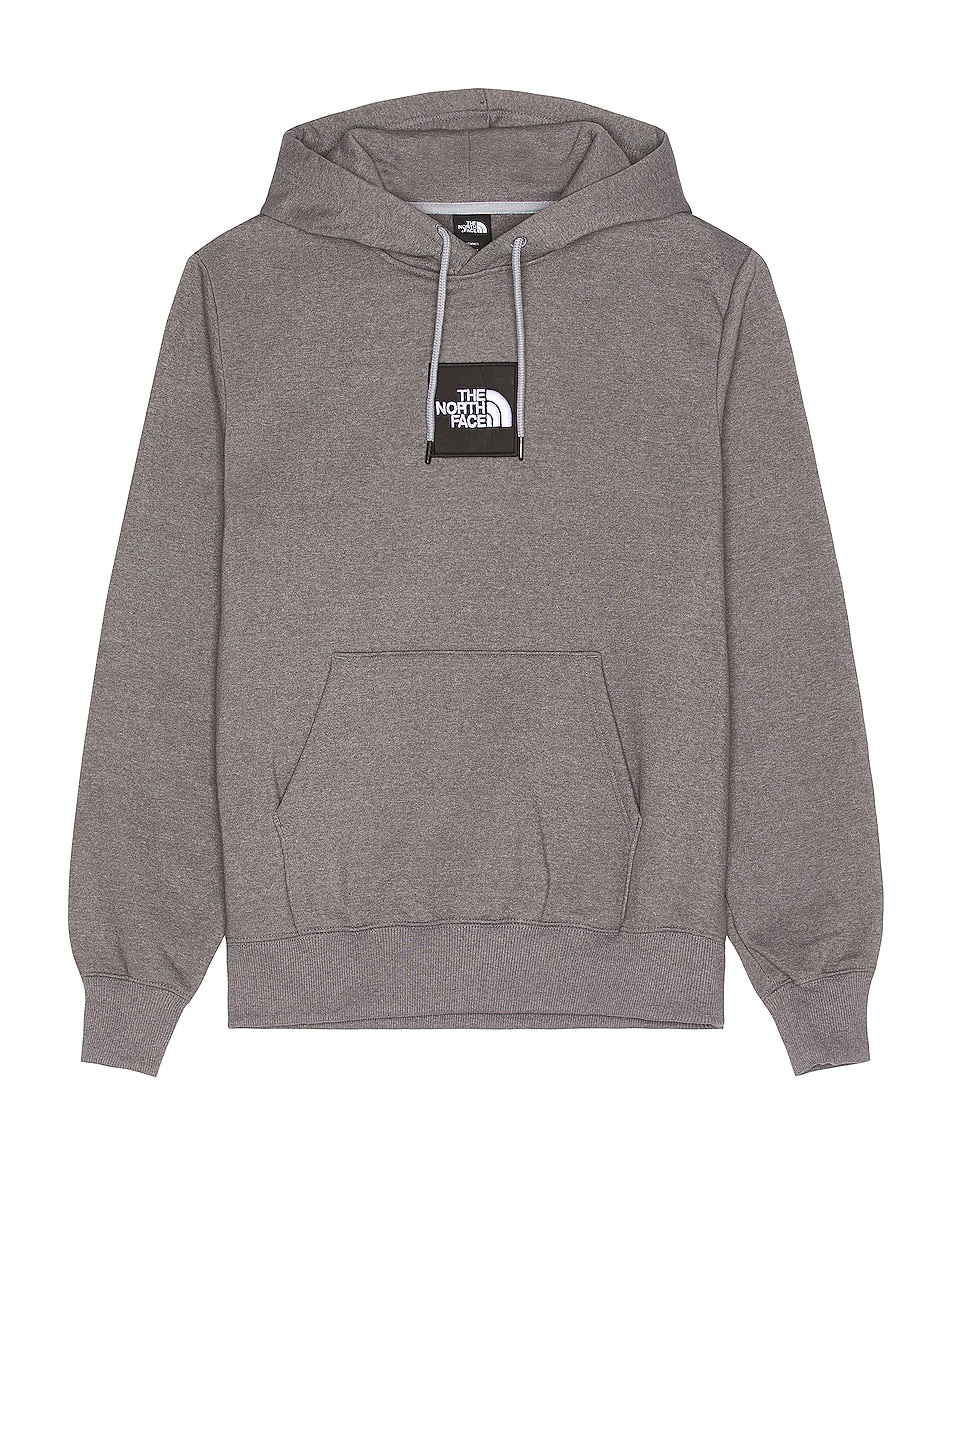 Image 1 of The North Face Heavyweight Box Pullover Hoodie in Tnf Medium Grey Heather